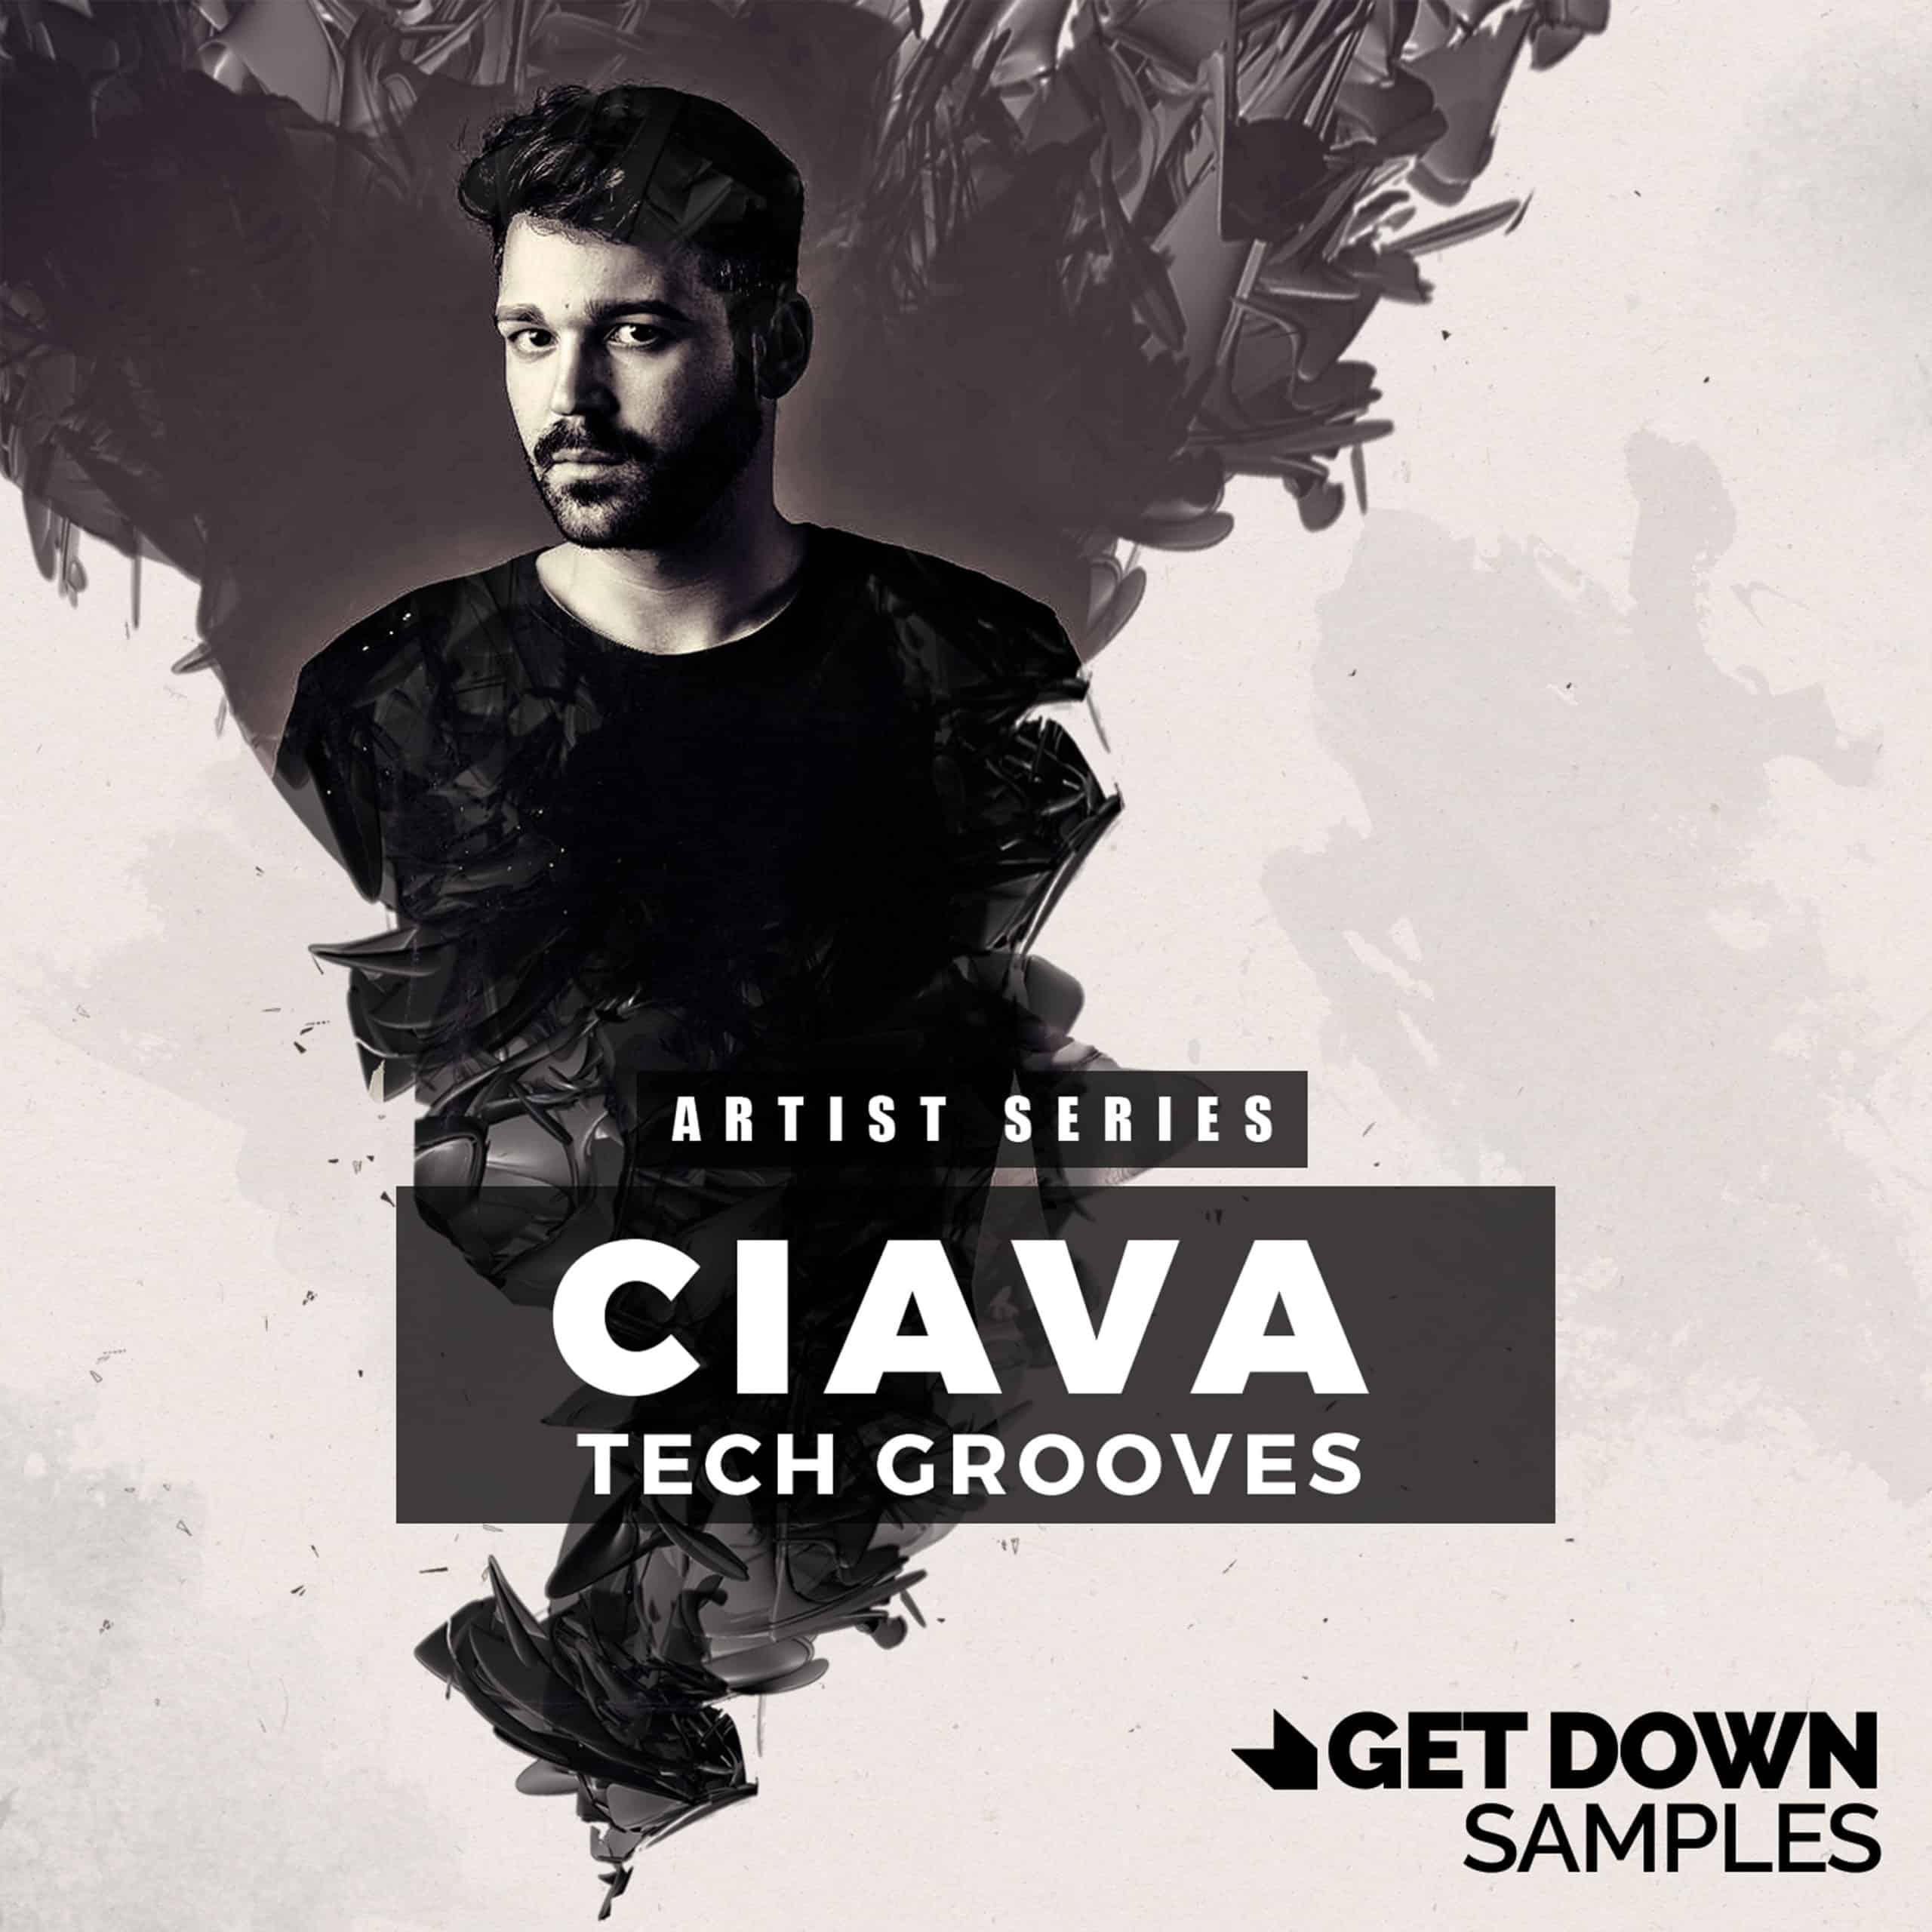 Get Down Samples – Ciava Tech Grooves